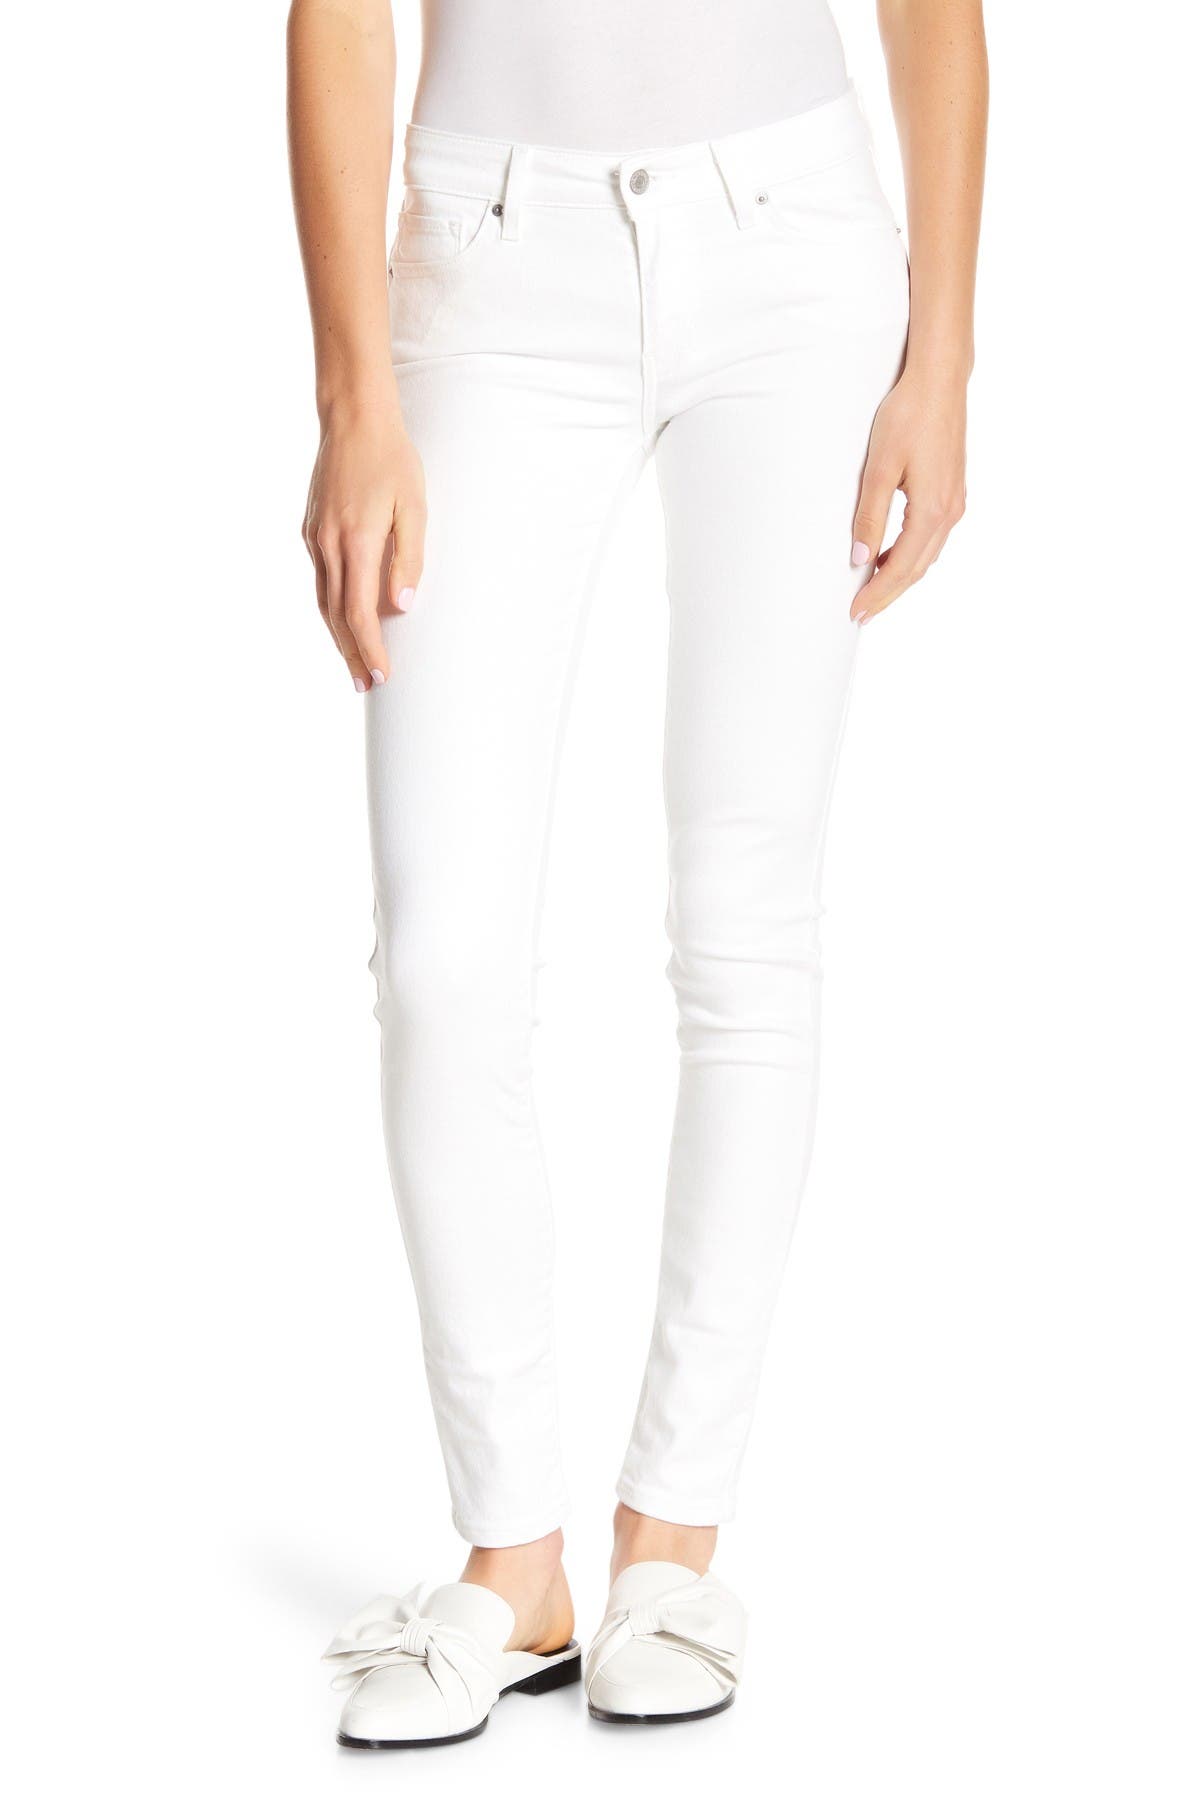 levi's 711 skinny ankle jeans white